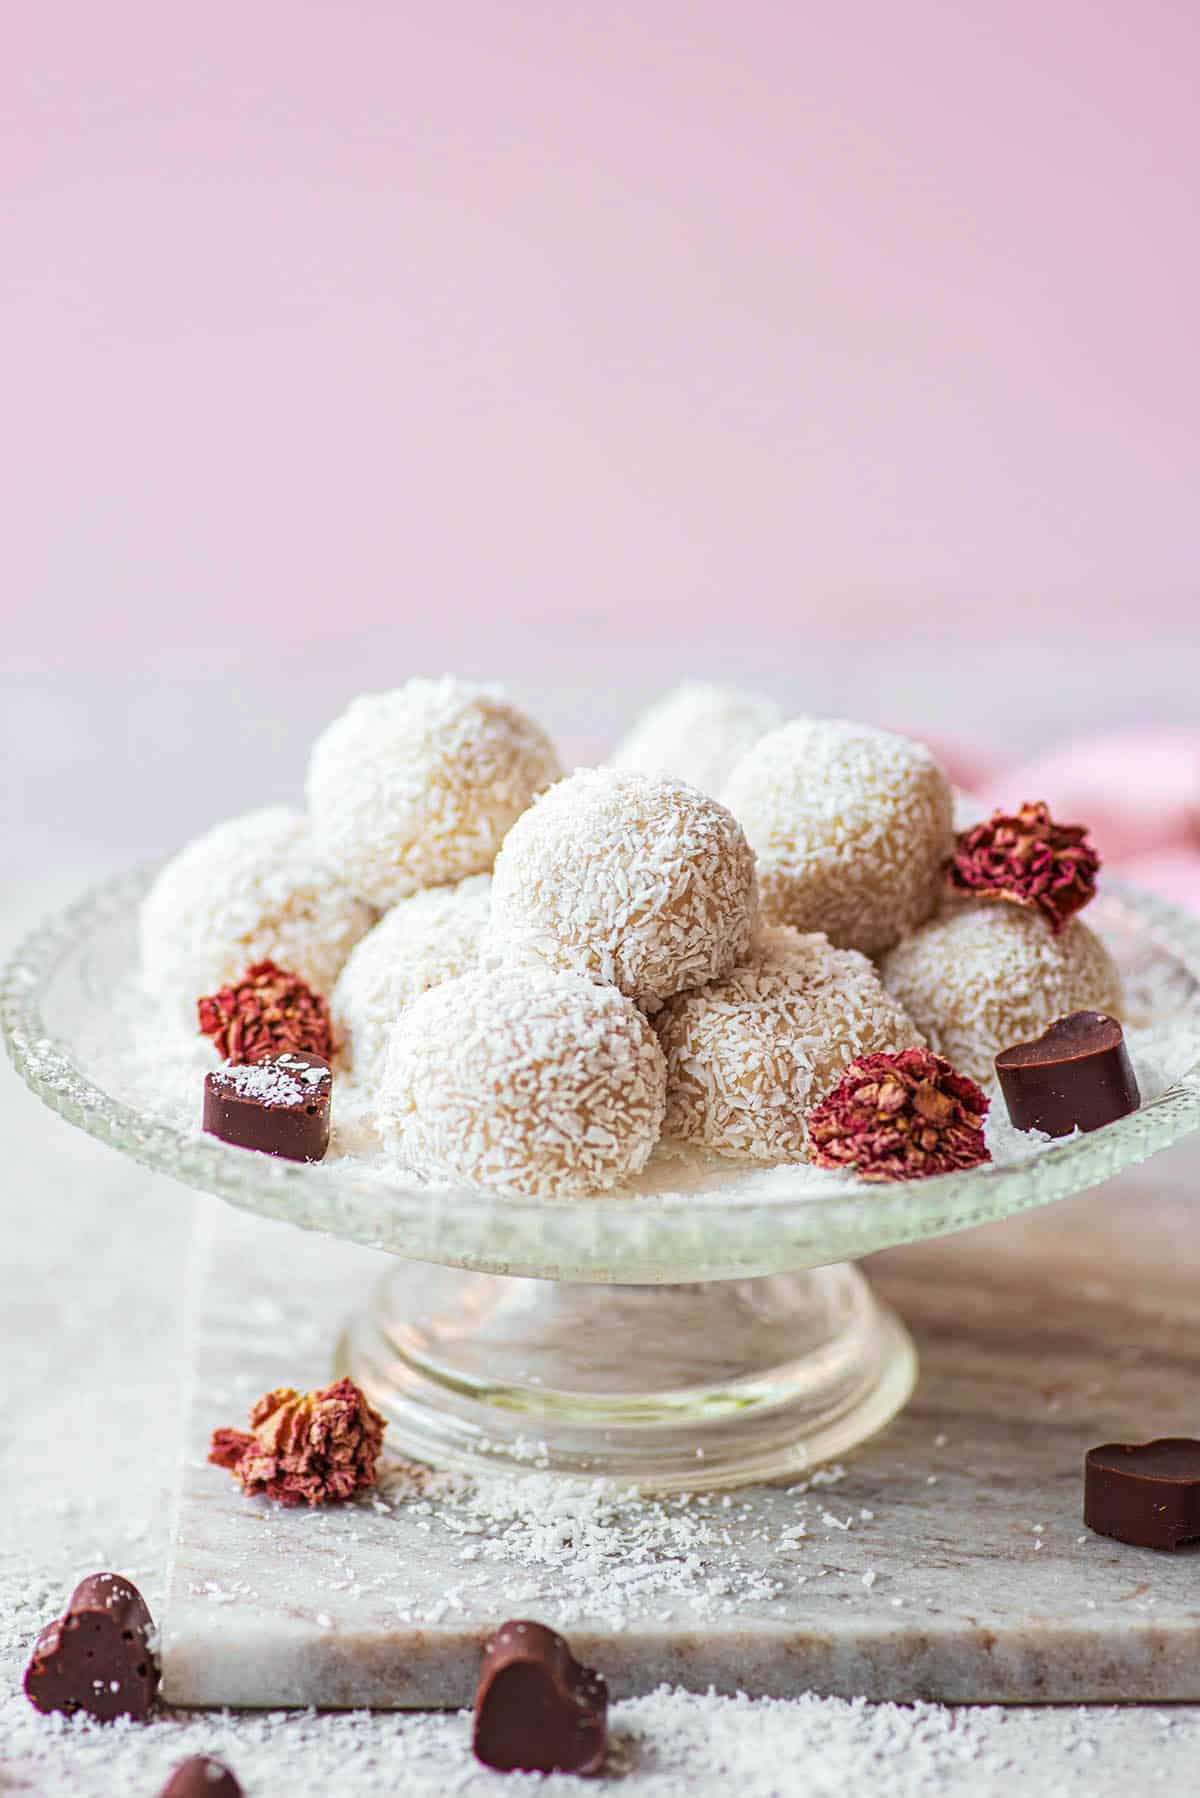 Coconut-coated chocolate truffles on a small glass serving dish.